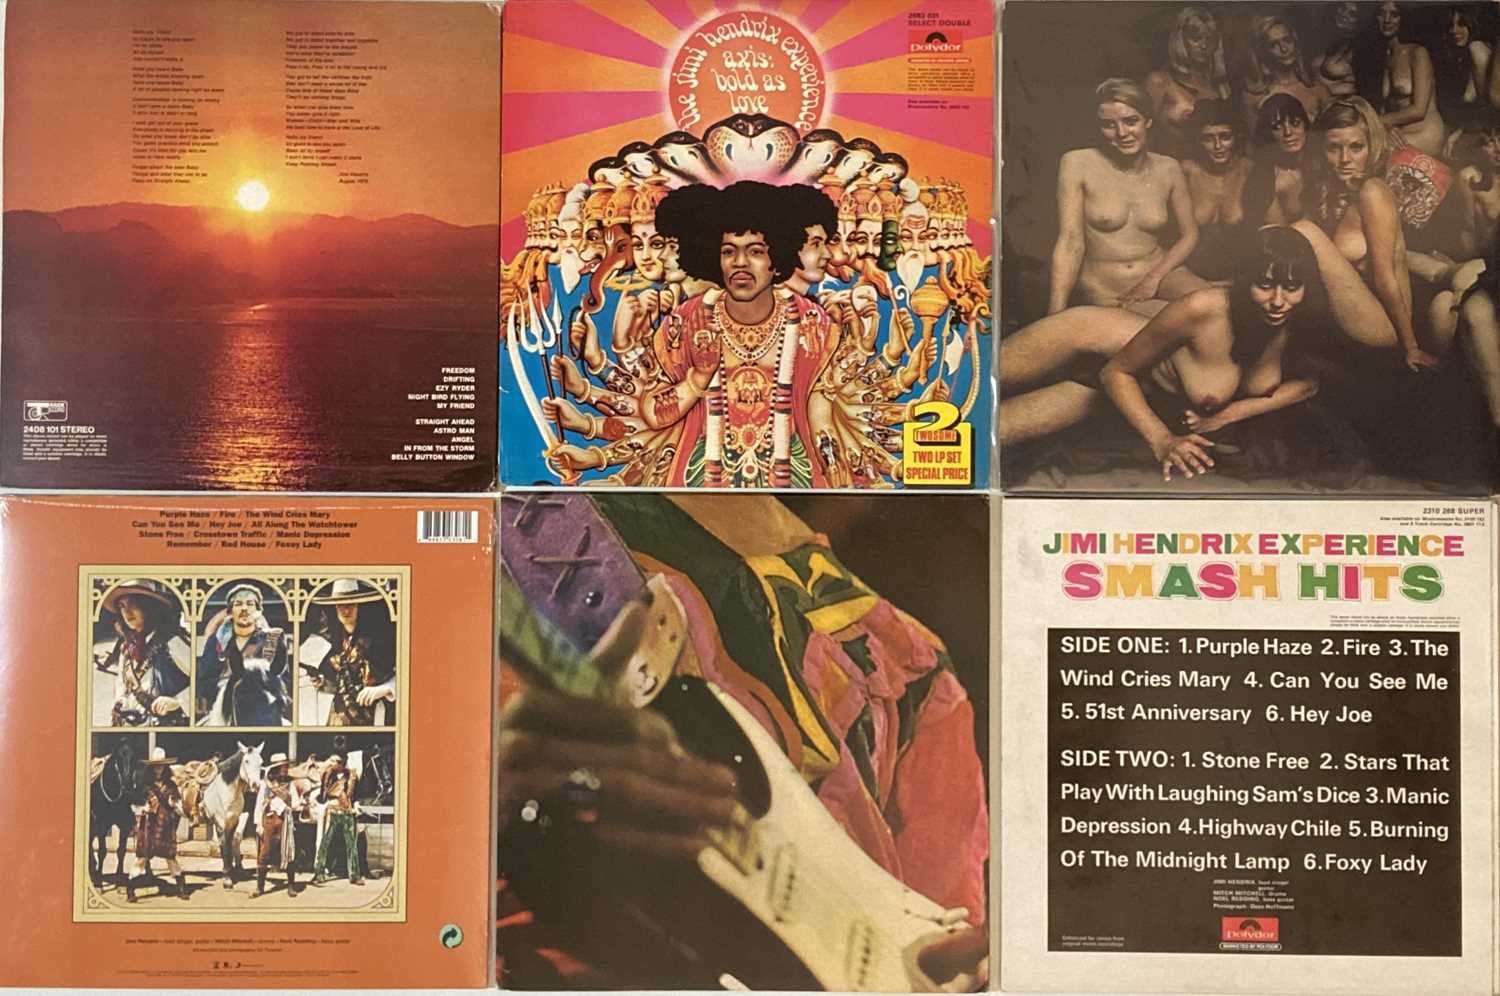 The Jimi Hendrix Experience - LP Collection - Image 2 of 2